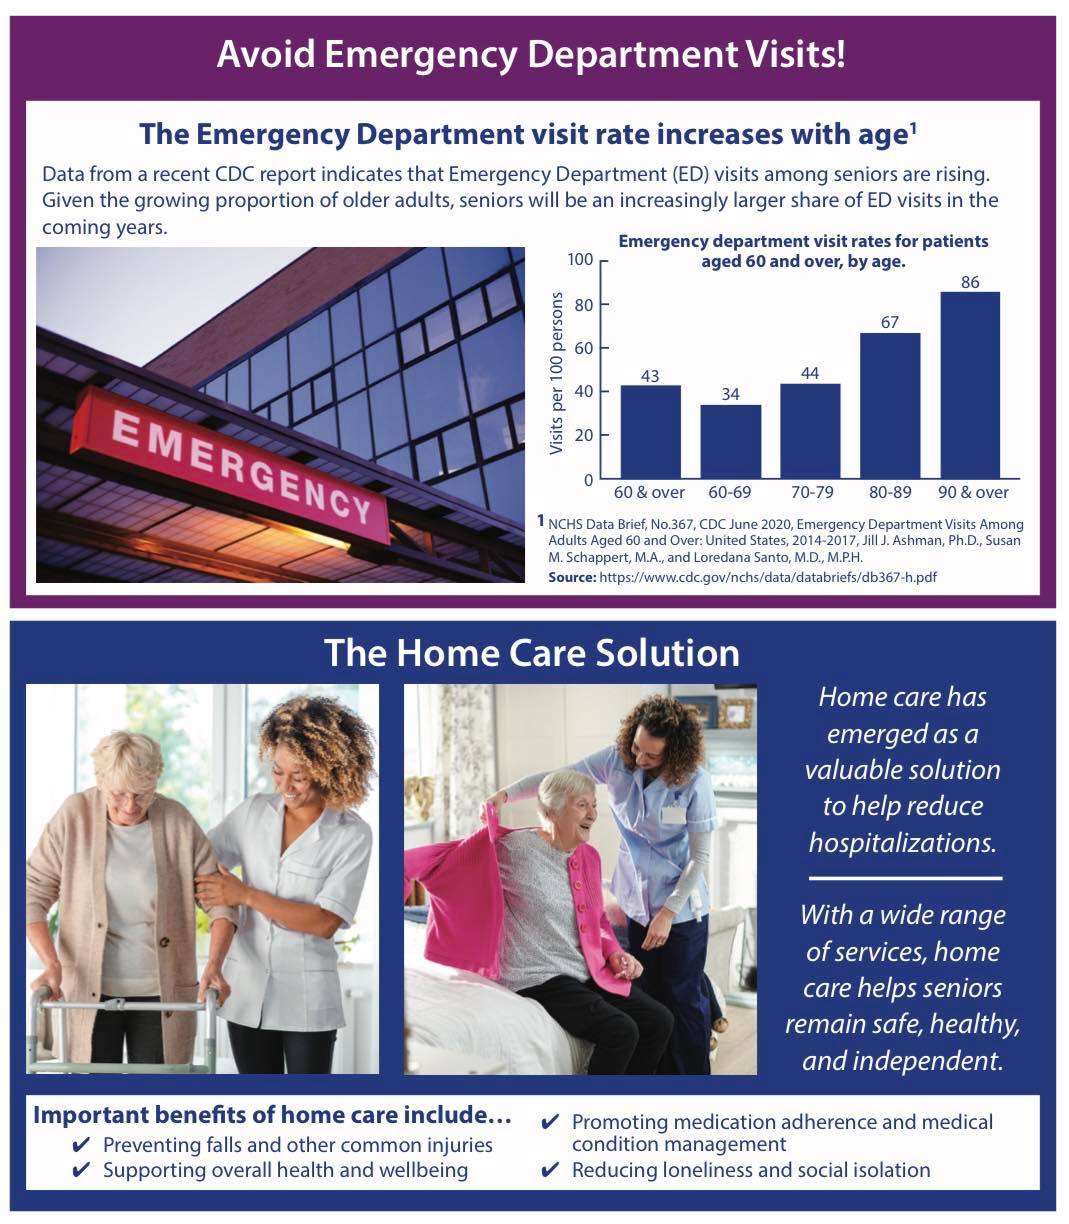 Emergency Department Visits Are Rising!